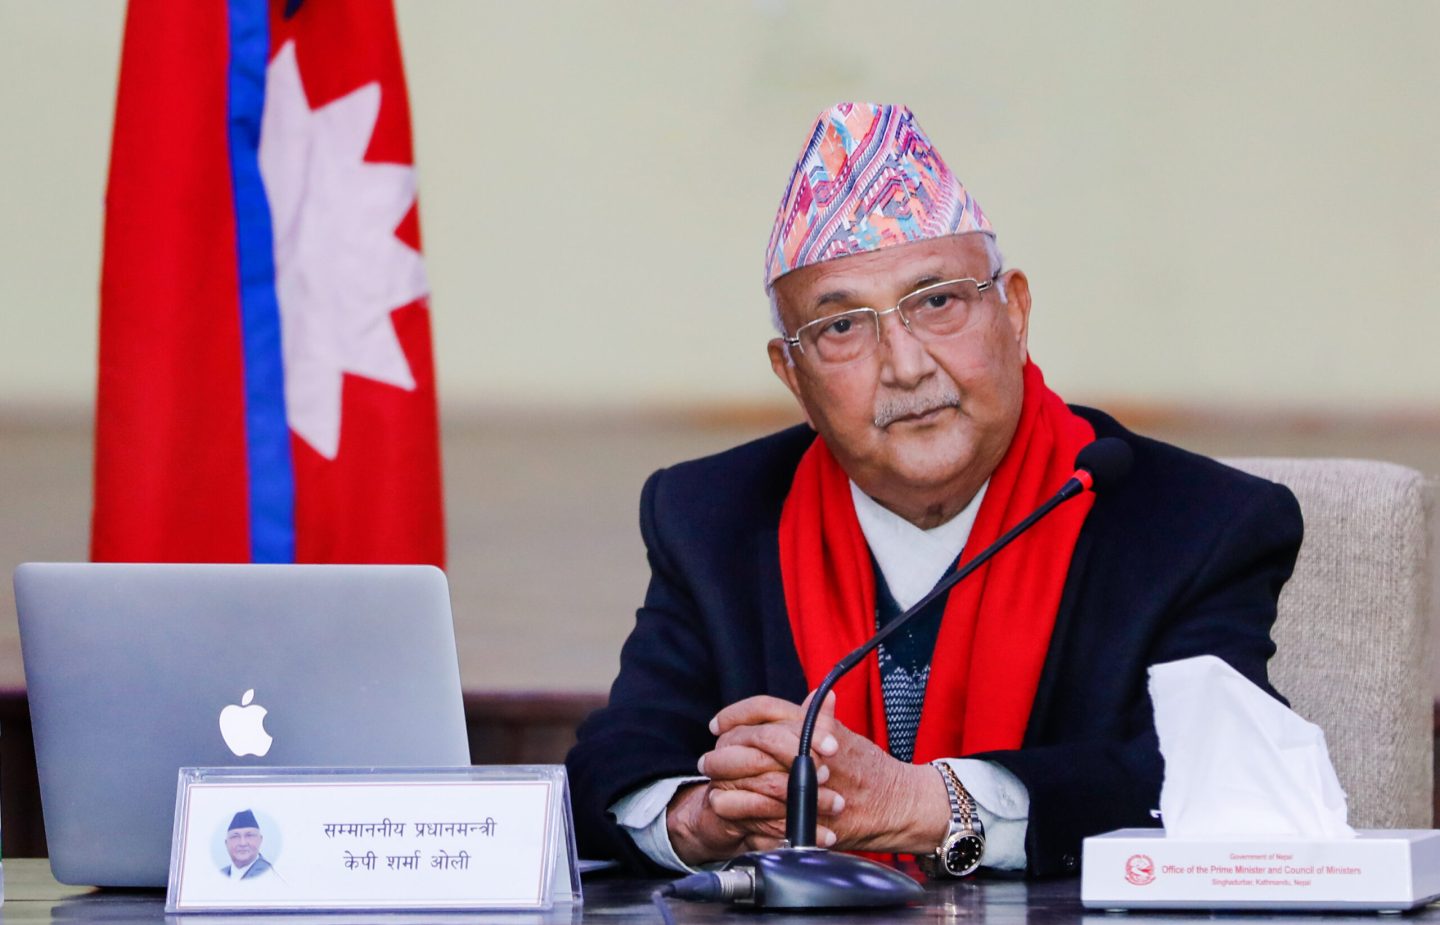 Elections will be held during COVID-19 pandemic, claims PM Oli